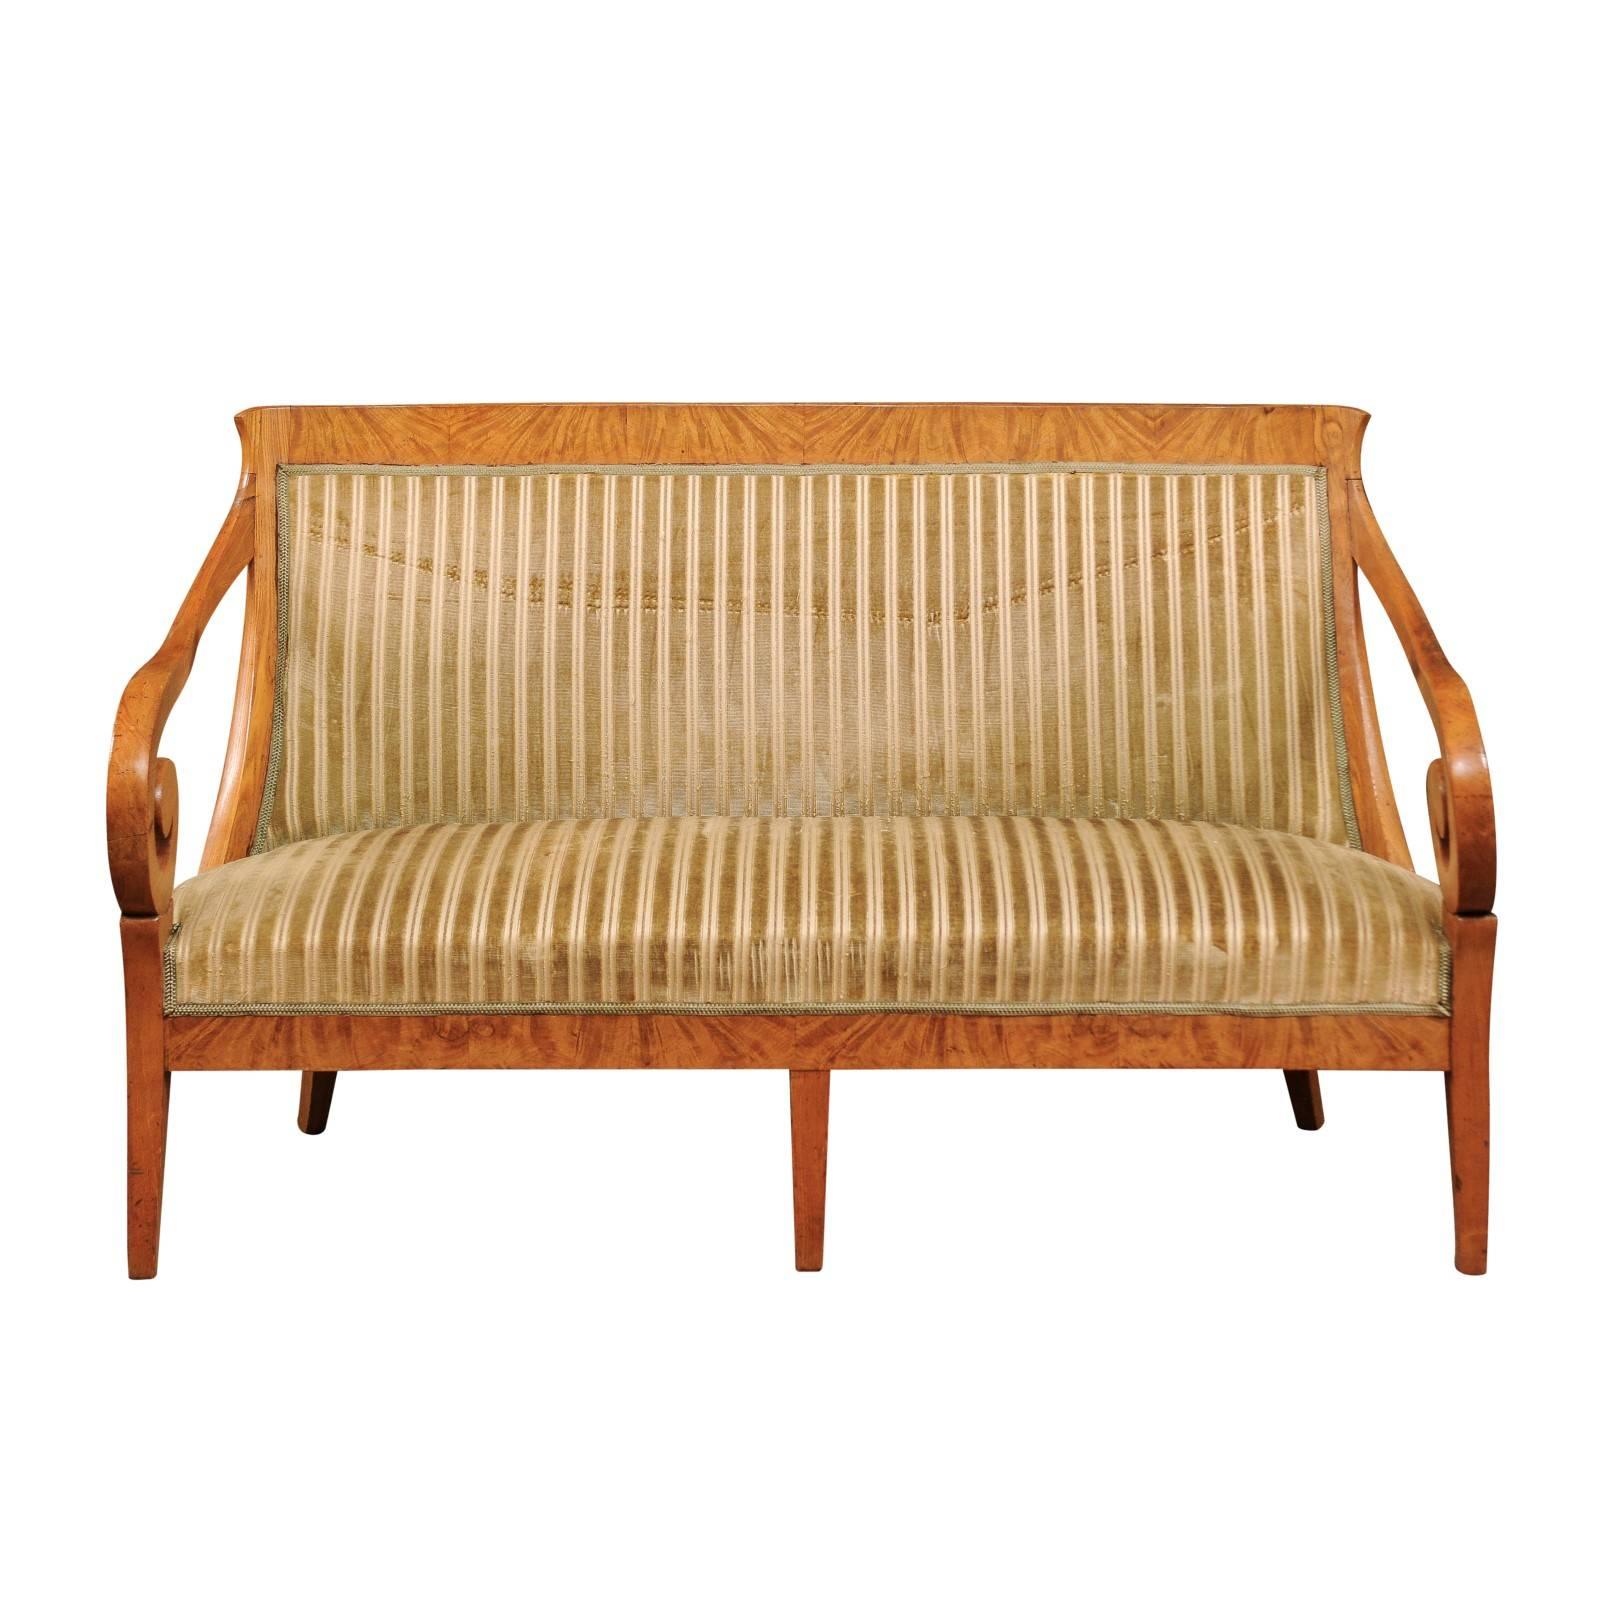 Early 19th Biedermeier Settee with Scroll Arms and Curved Back in Birch Wood